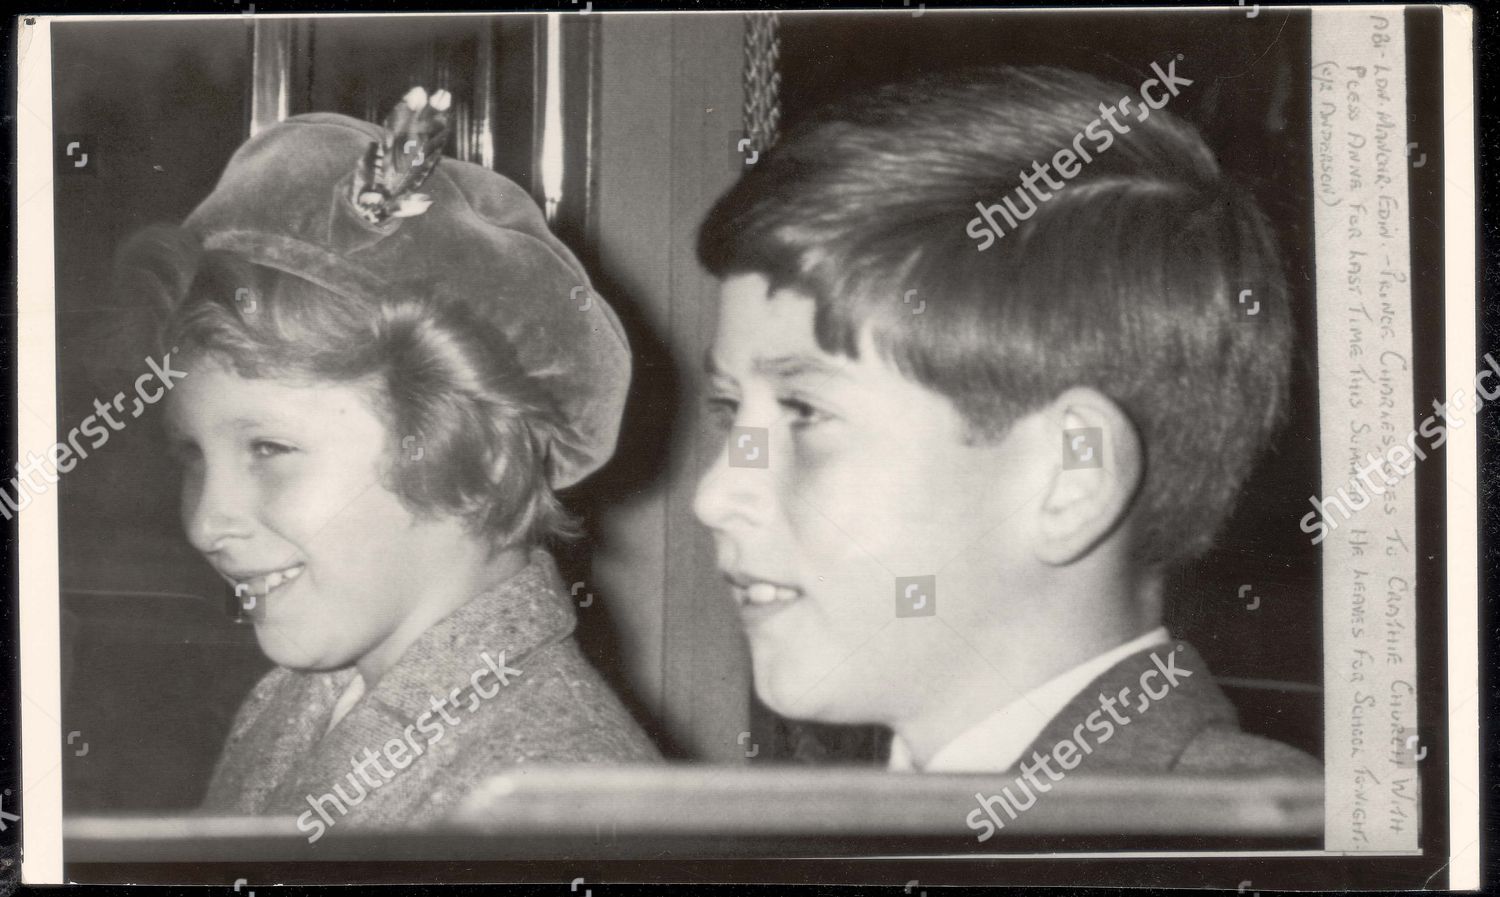 prince-charles-prince-of-wales-september-1959-prince-charles-goes-to-crathie-church-with-princess-anne-for-the-last-time-this-summer-prince-charles-returns-to-school-tonight-royalty-shutterstock-editorial-884430a.jpg